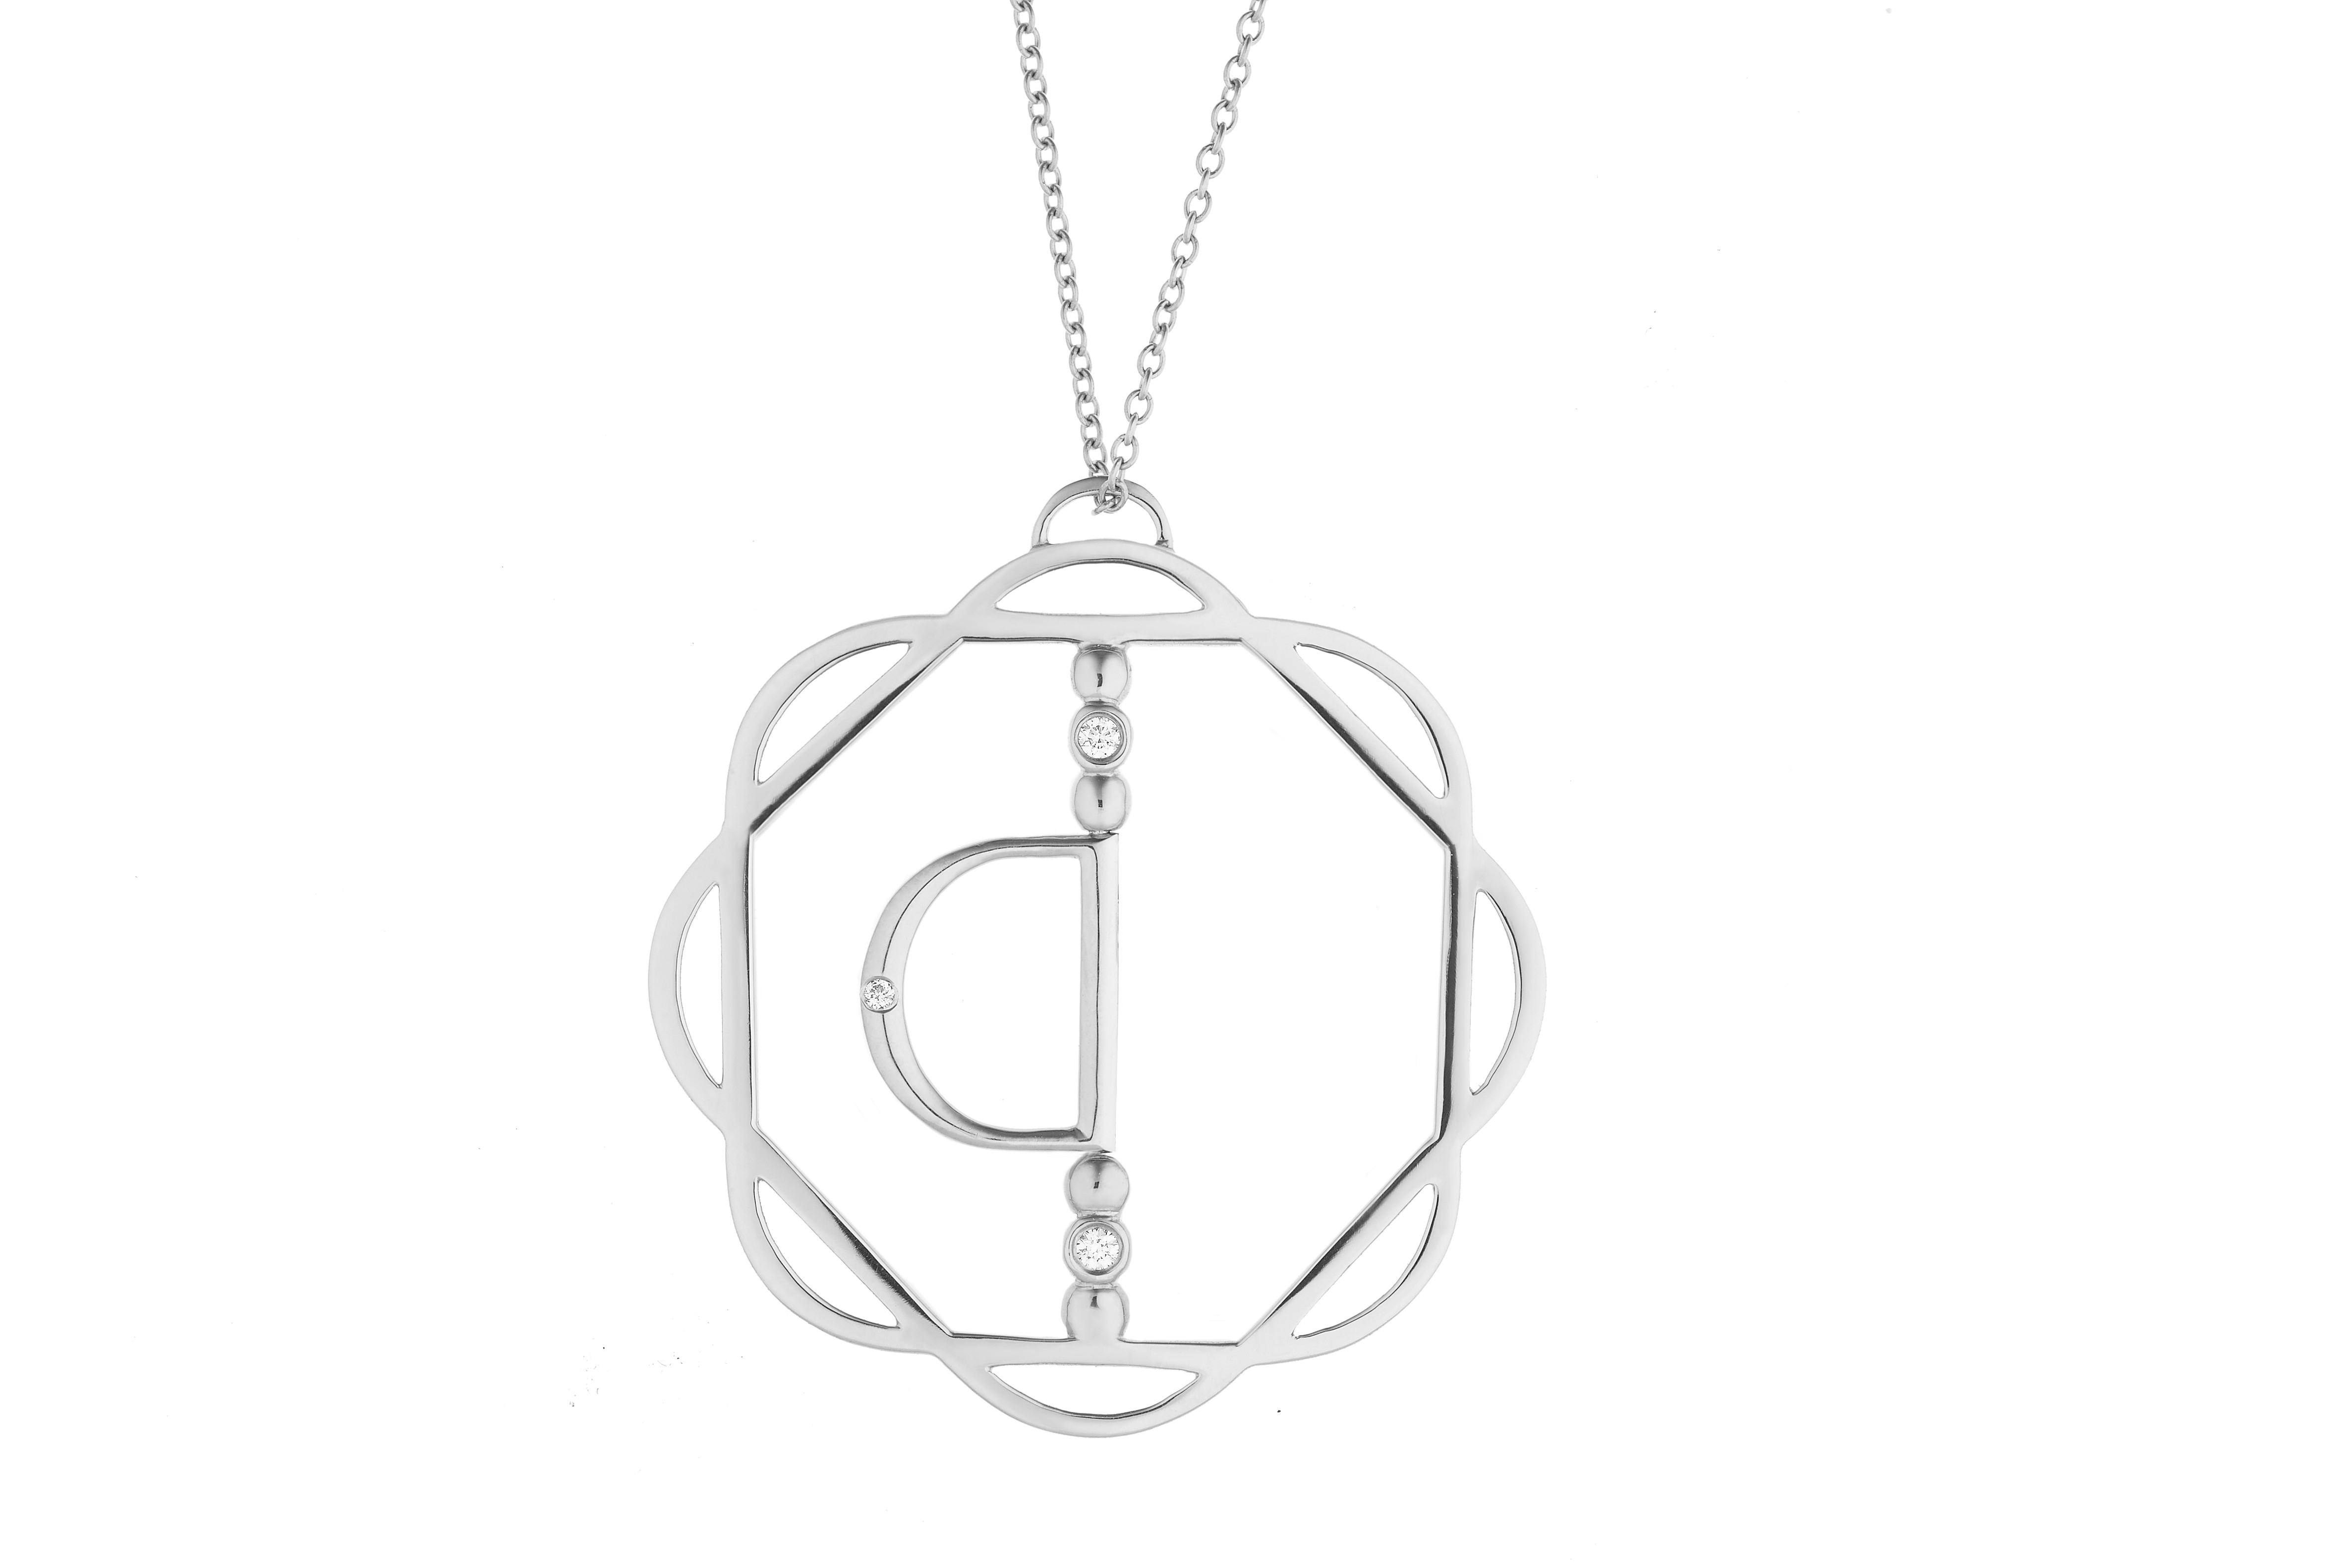 18K White Gold Cut-Out Flora Pendant with Mirror D and 3 Lab Created Diamonds on AIDIA Extendable Link Chain 